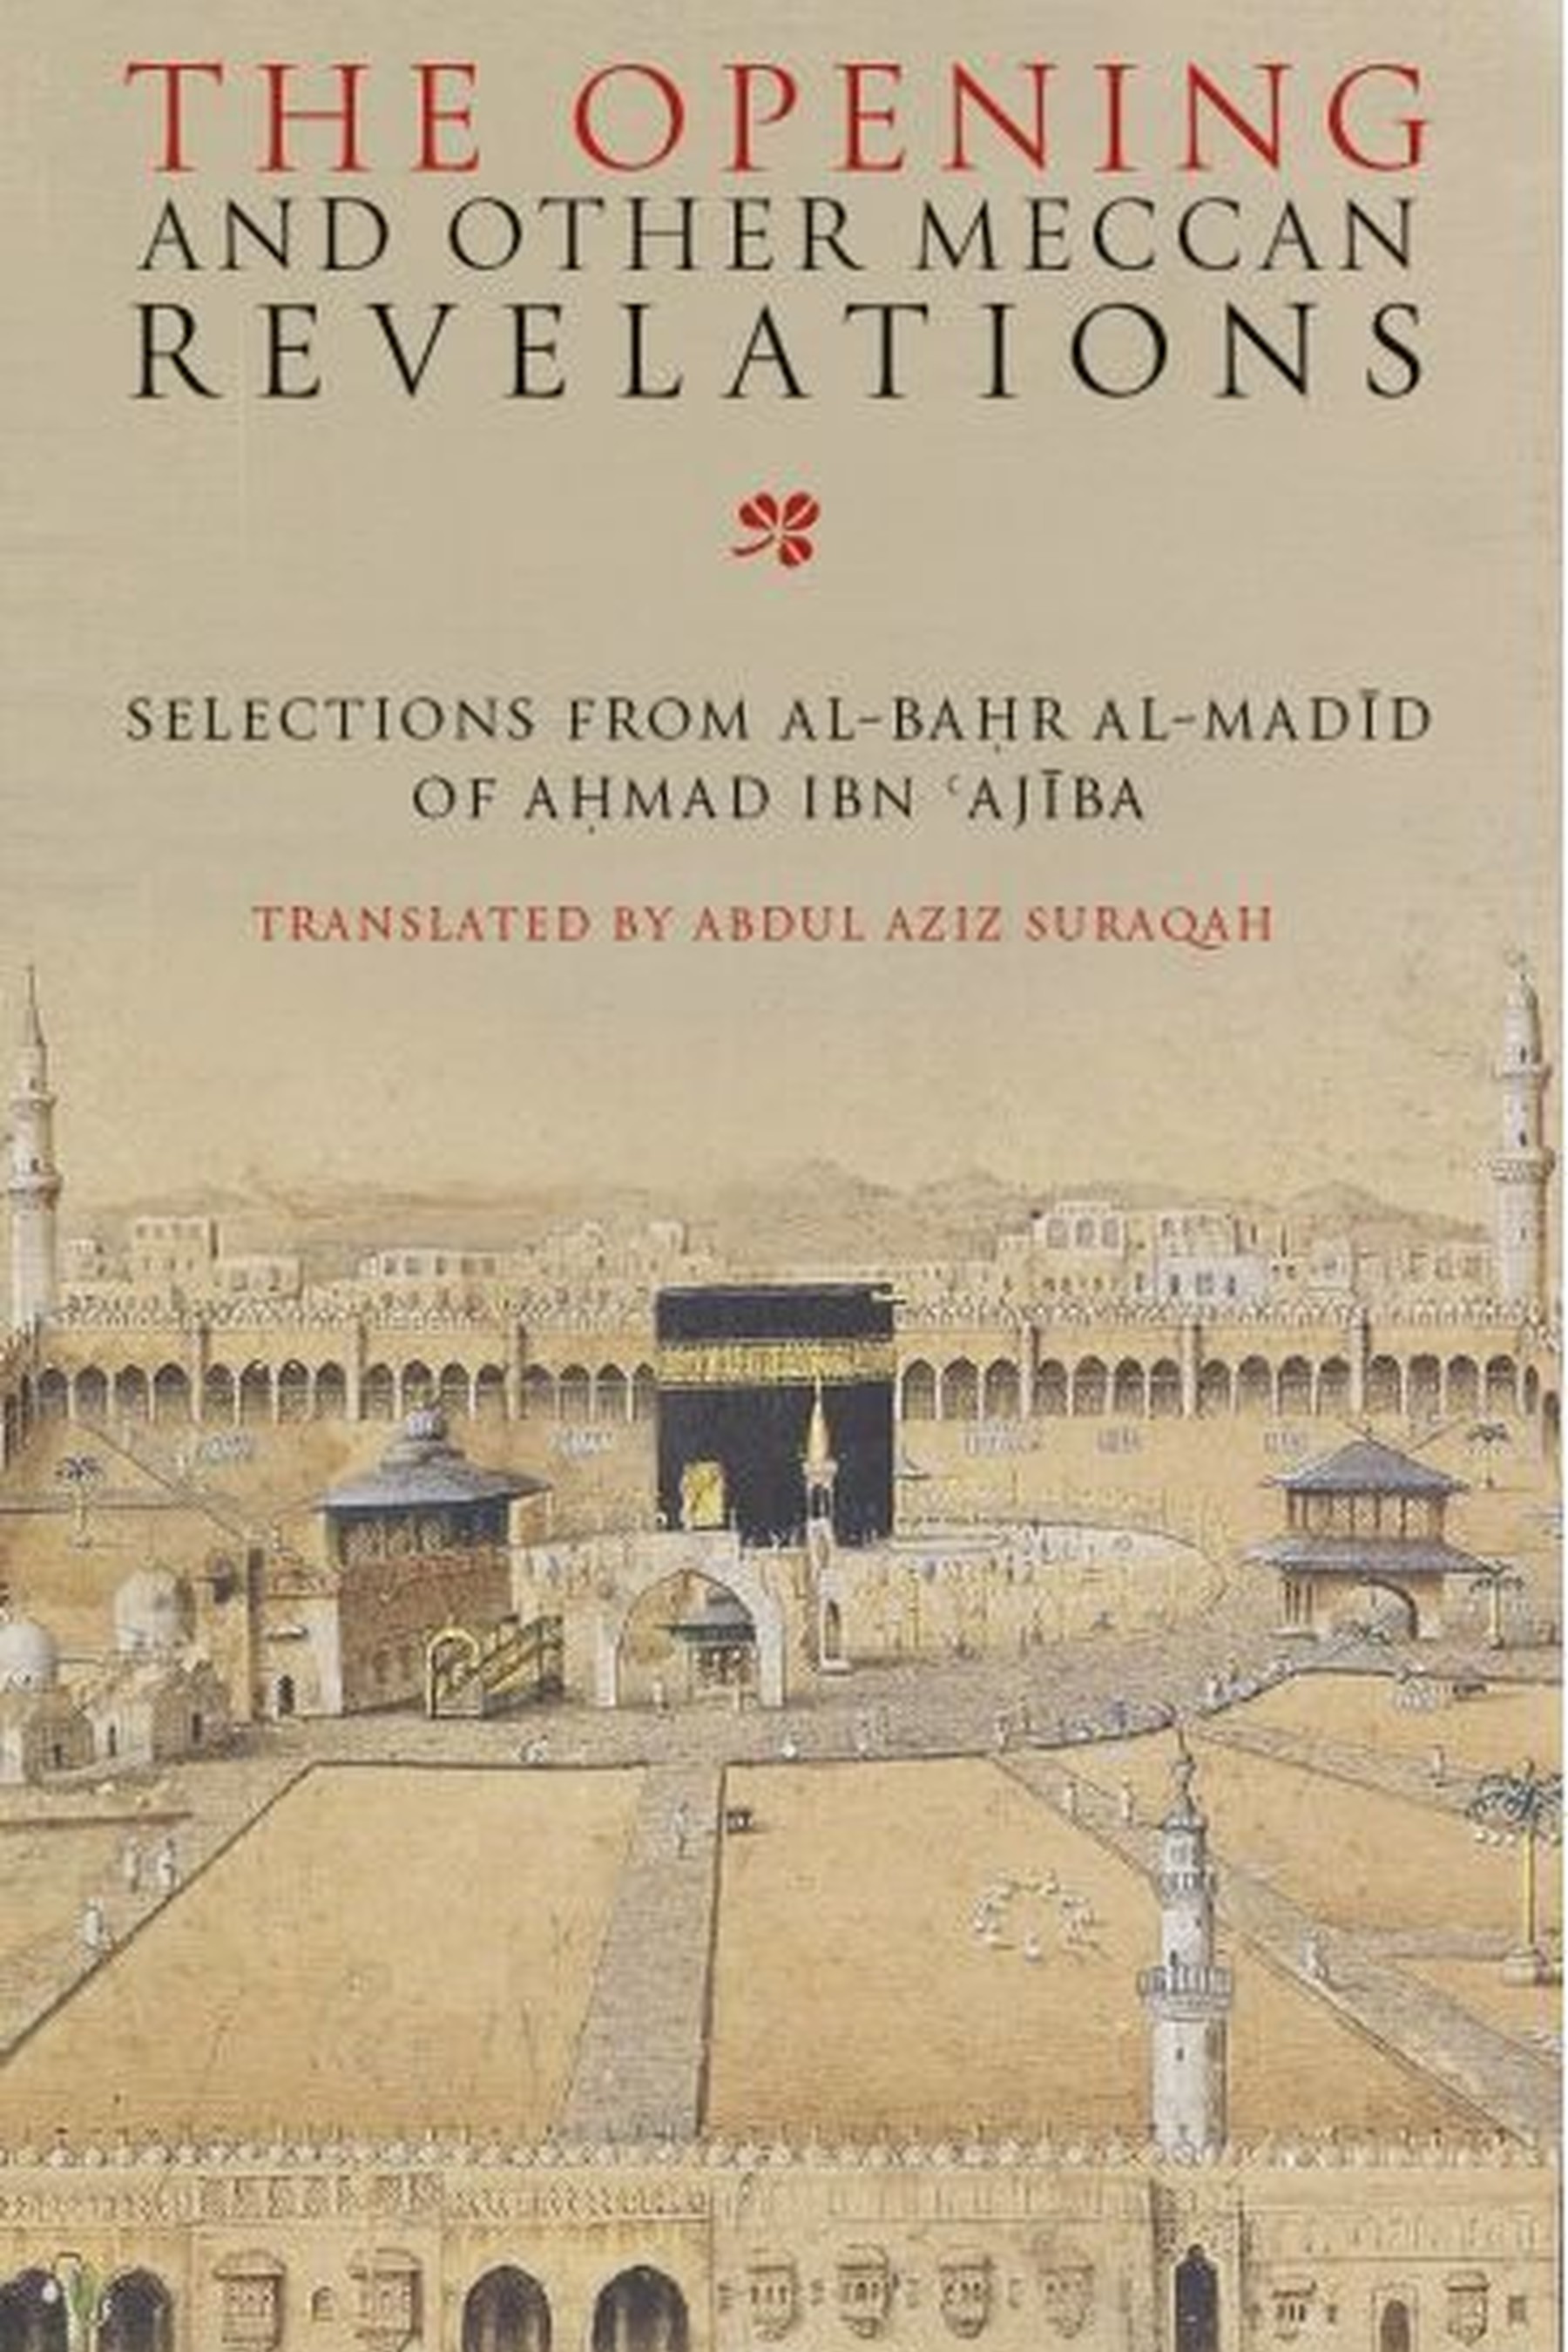 The opening and other meccan revelations selections from al bahar al madid